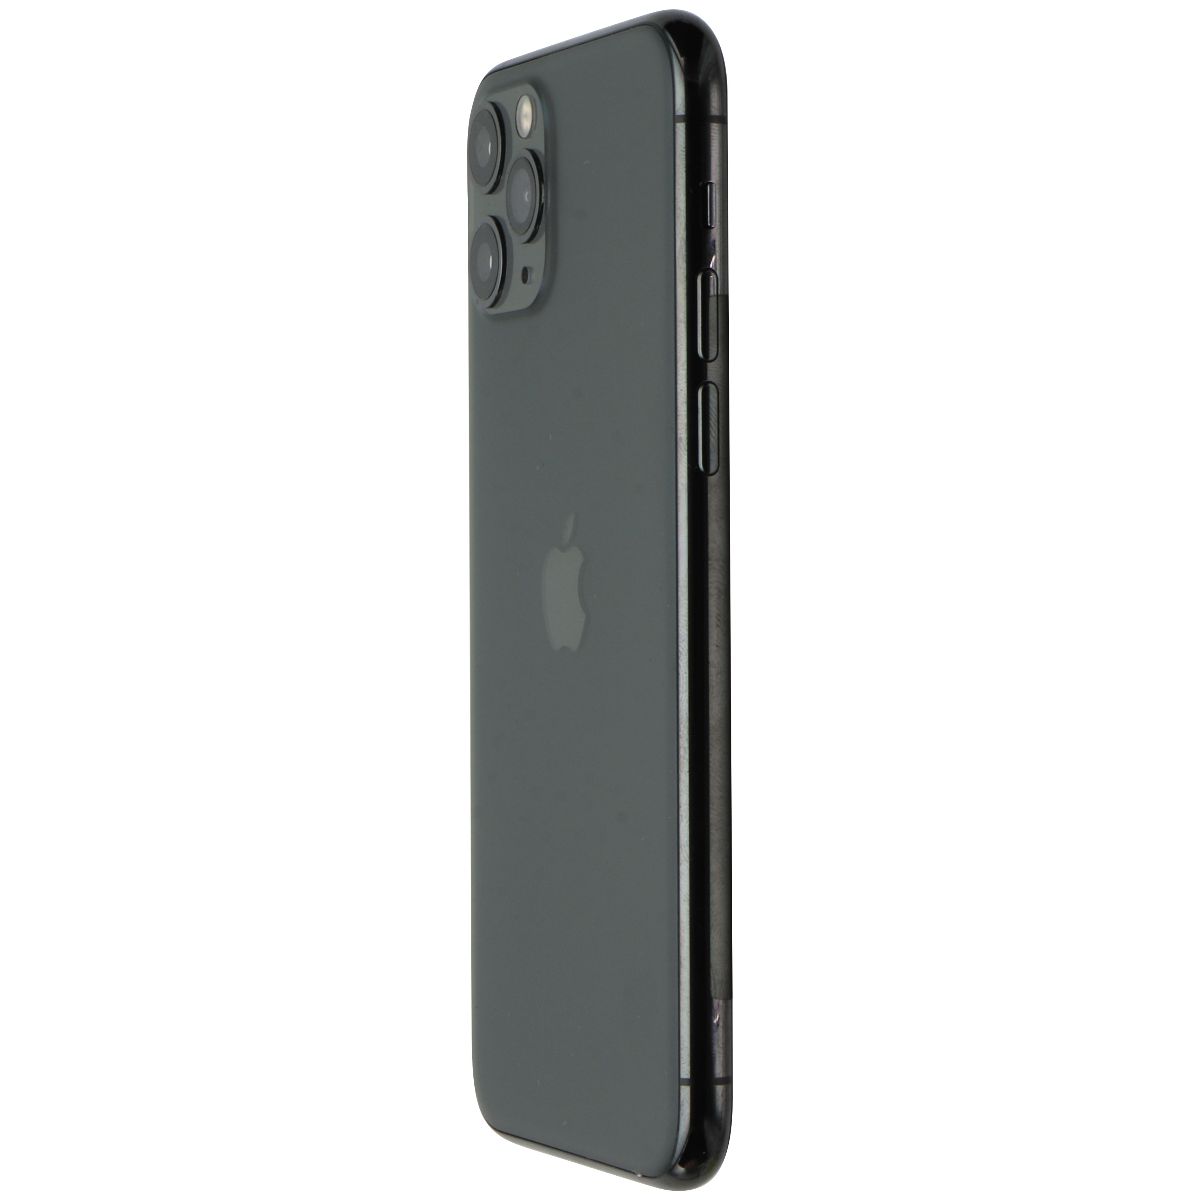 Apple iPhone 11 Pro (5.8-inch) Smartphone A2160 (Unlocked) - 64GB / Space Gray Cell Phones & Smartphones Apple    - Simple Cell Bulk Wholesale Pricing - USA Seller